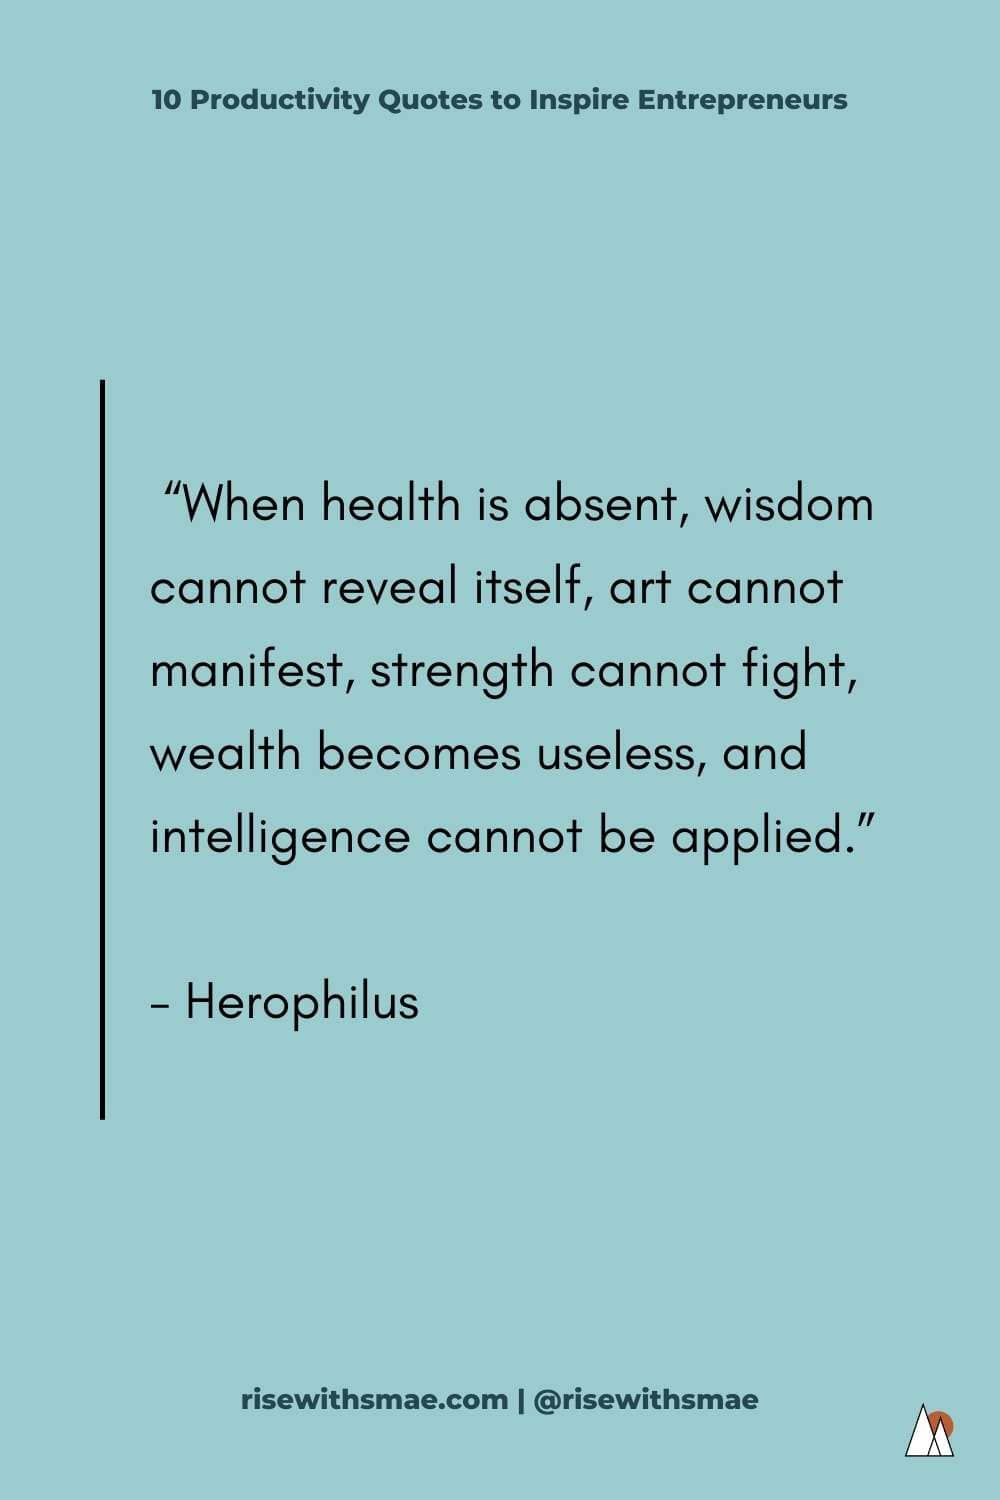 PRODUCTIVITY QUOTES FOR ENTREPRENEURS - Herophilus | Pin Image!